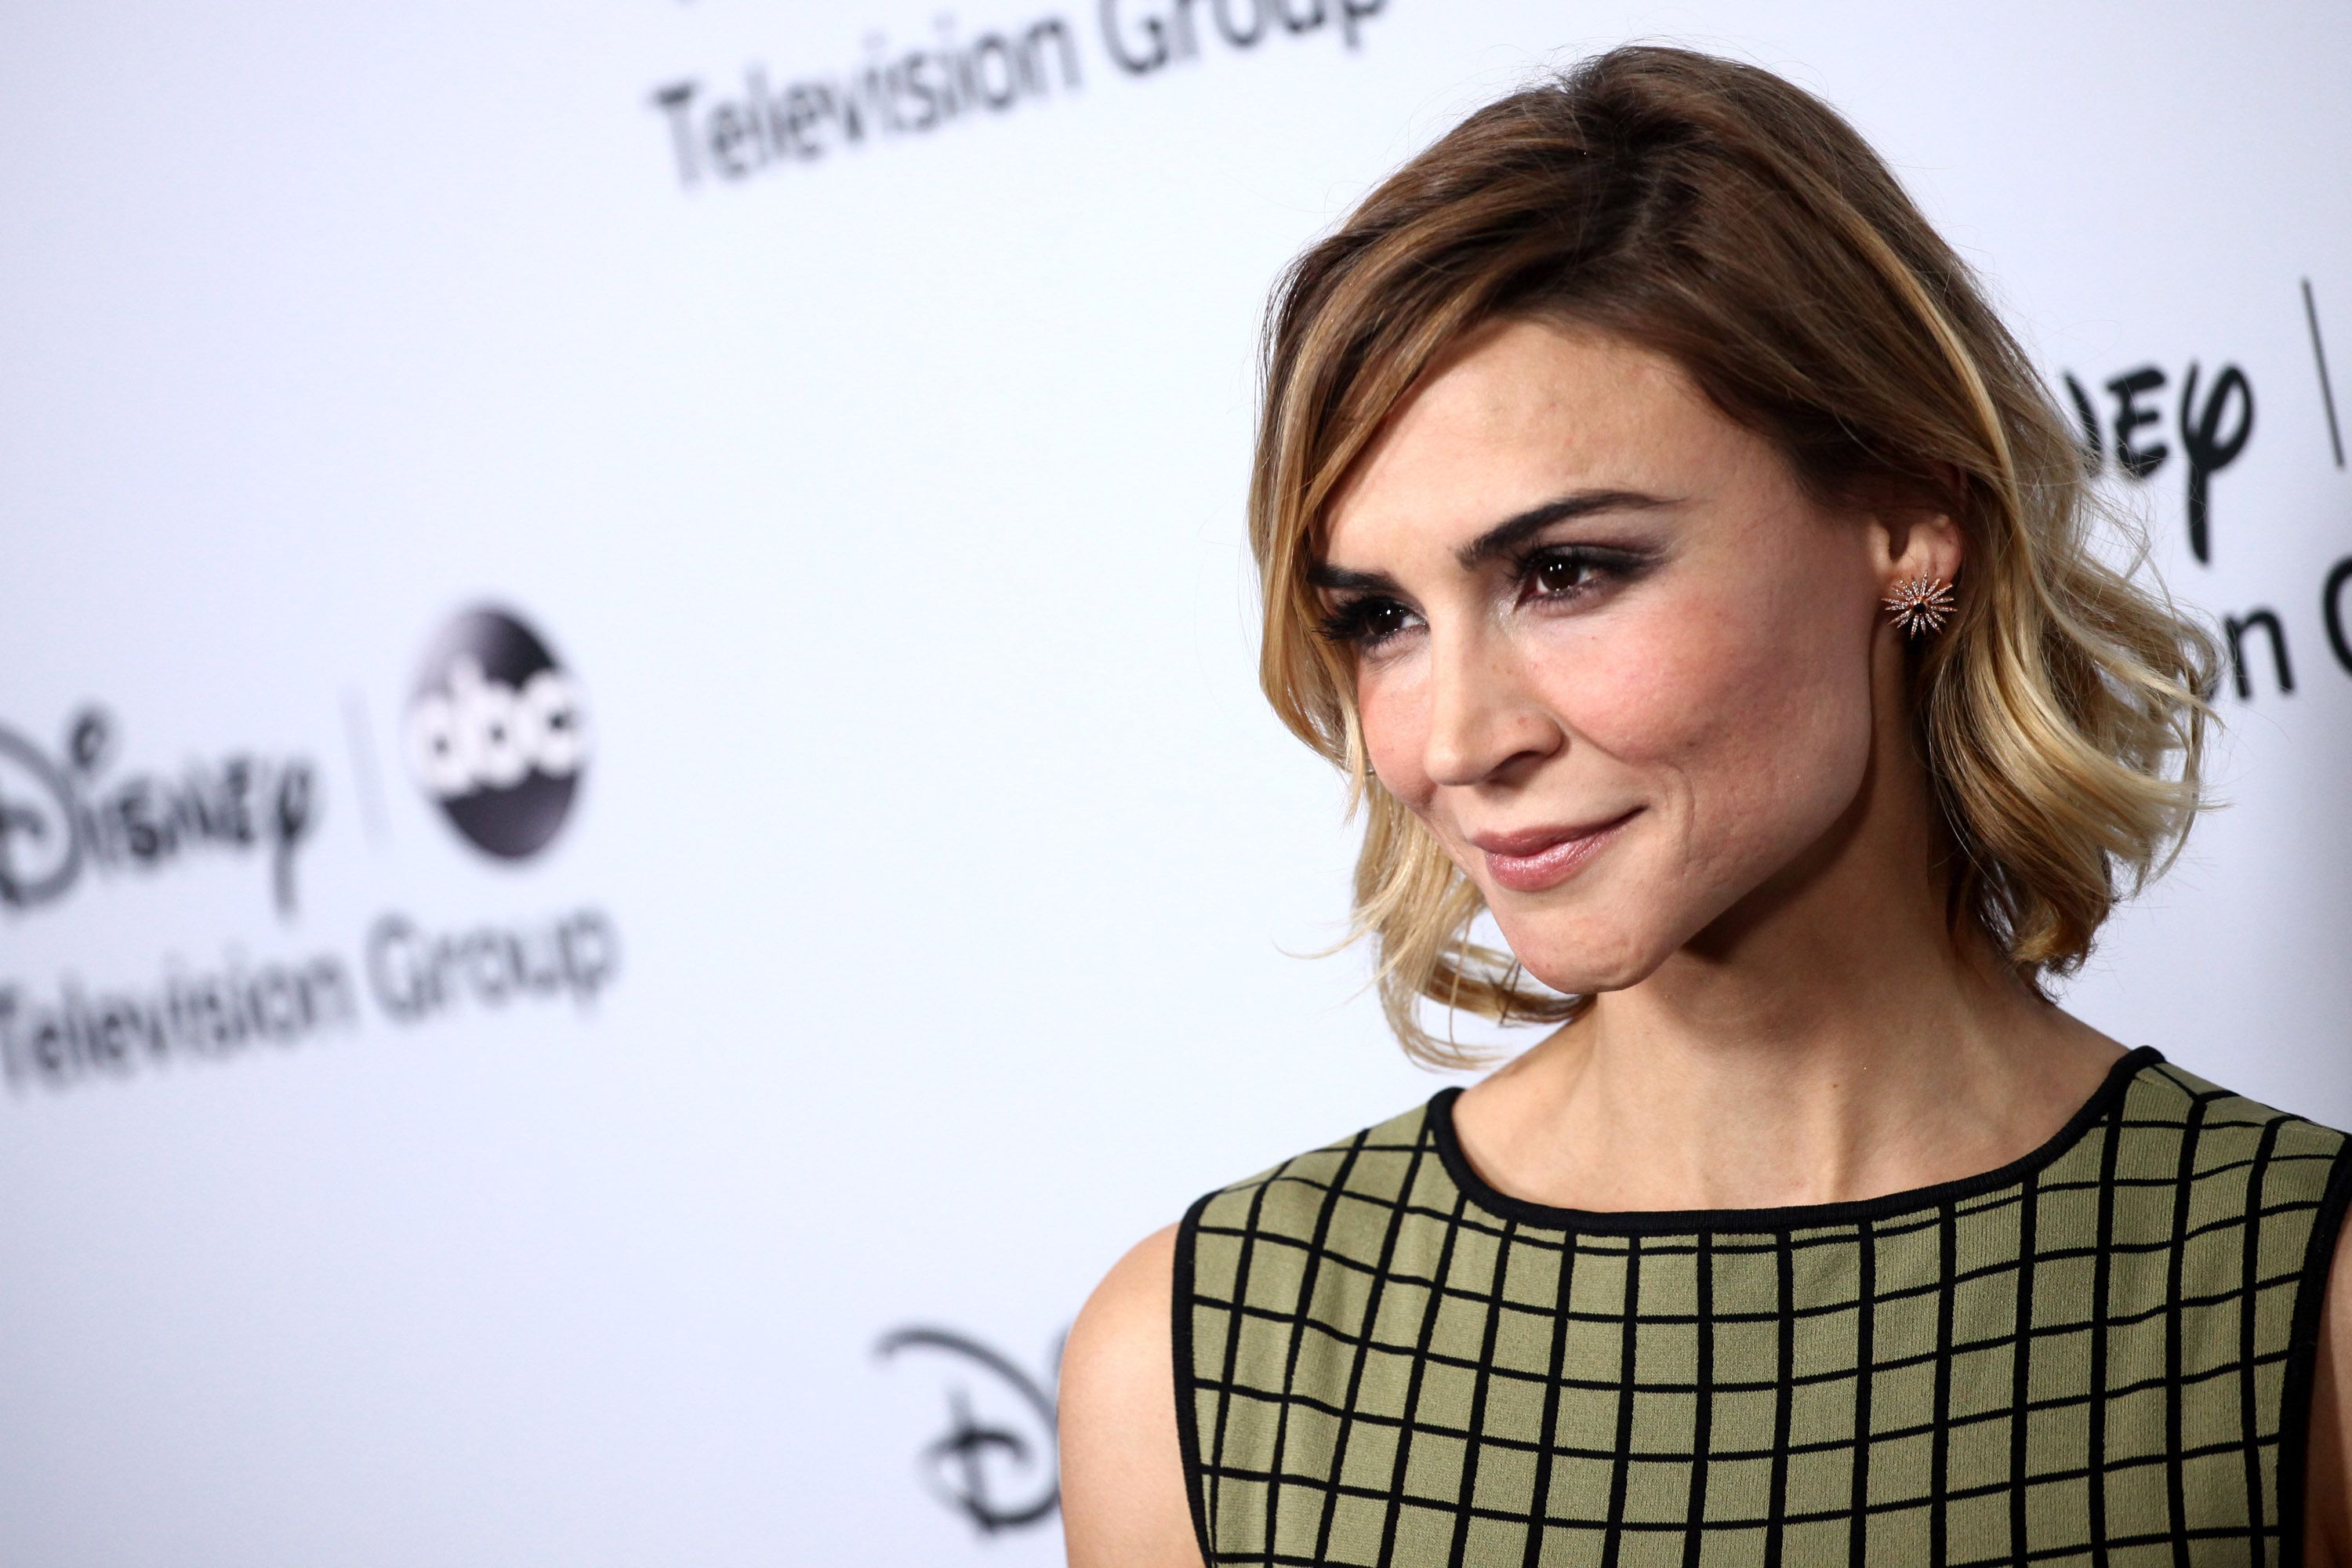 Samaire Armstrong poses at an event.